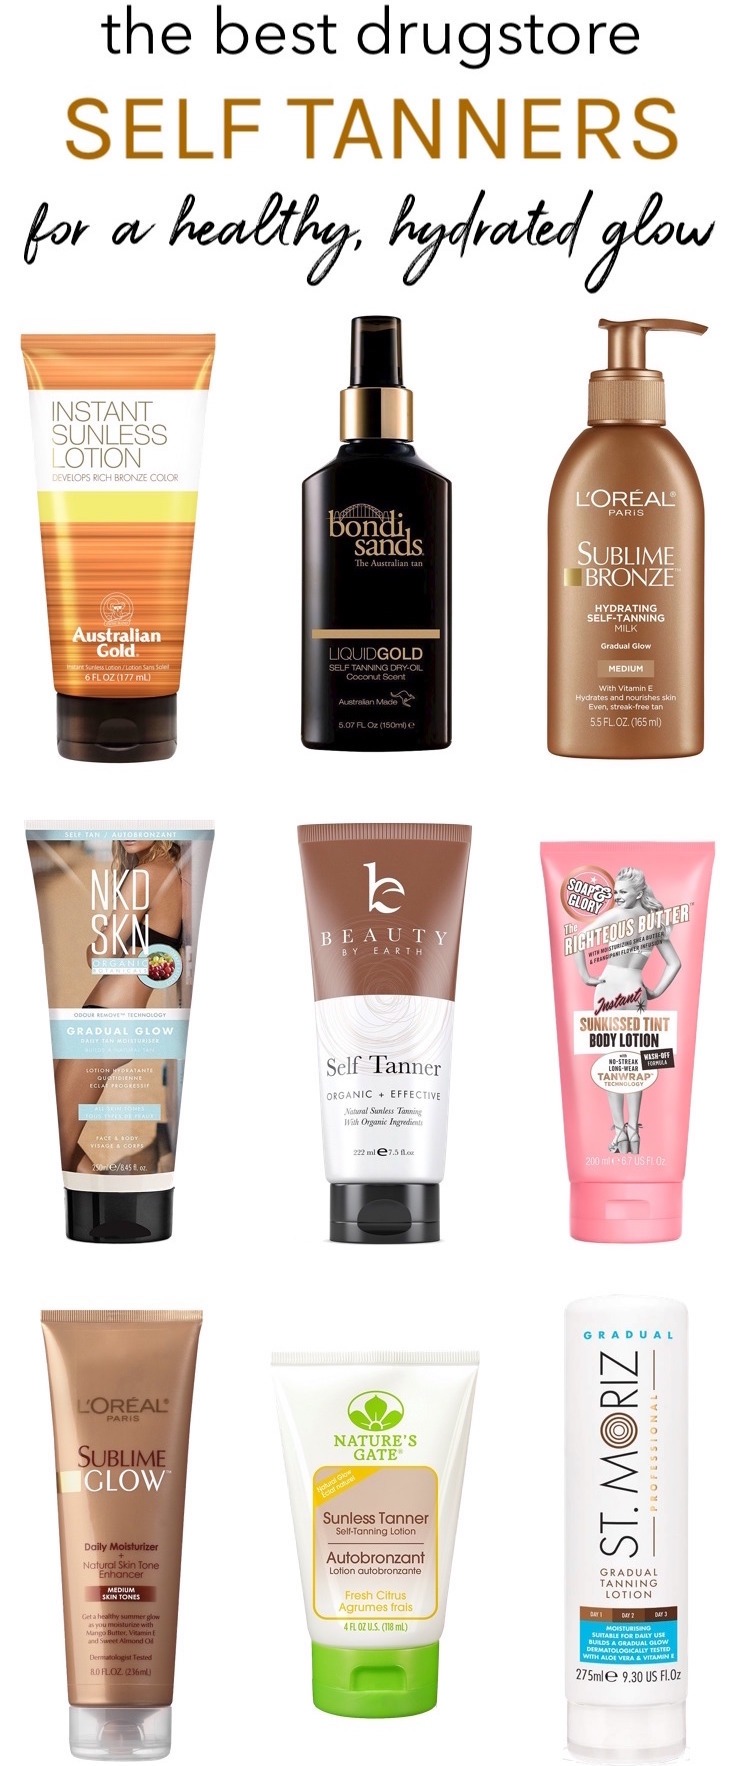 Kick pale, pasty skin to the curb without baking in the sun or hitting up tanning beds with these best drugstore self tanning lotions. With these hydrating self-tanners, you’ll never have to worry about streaks, funky odors or blotchiness!